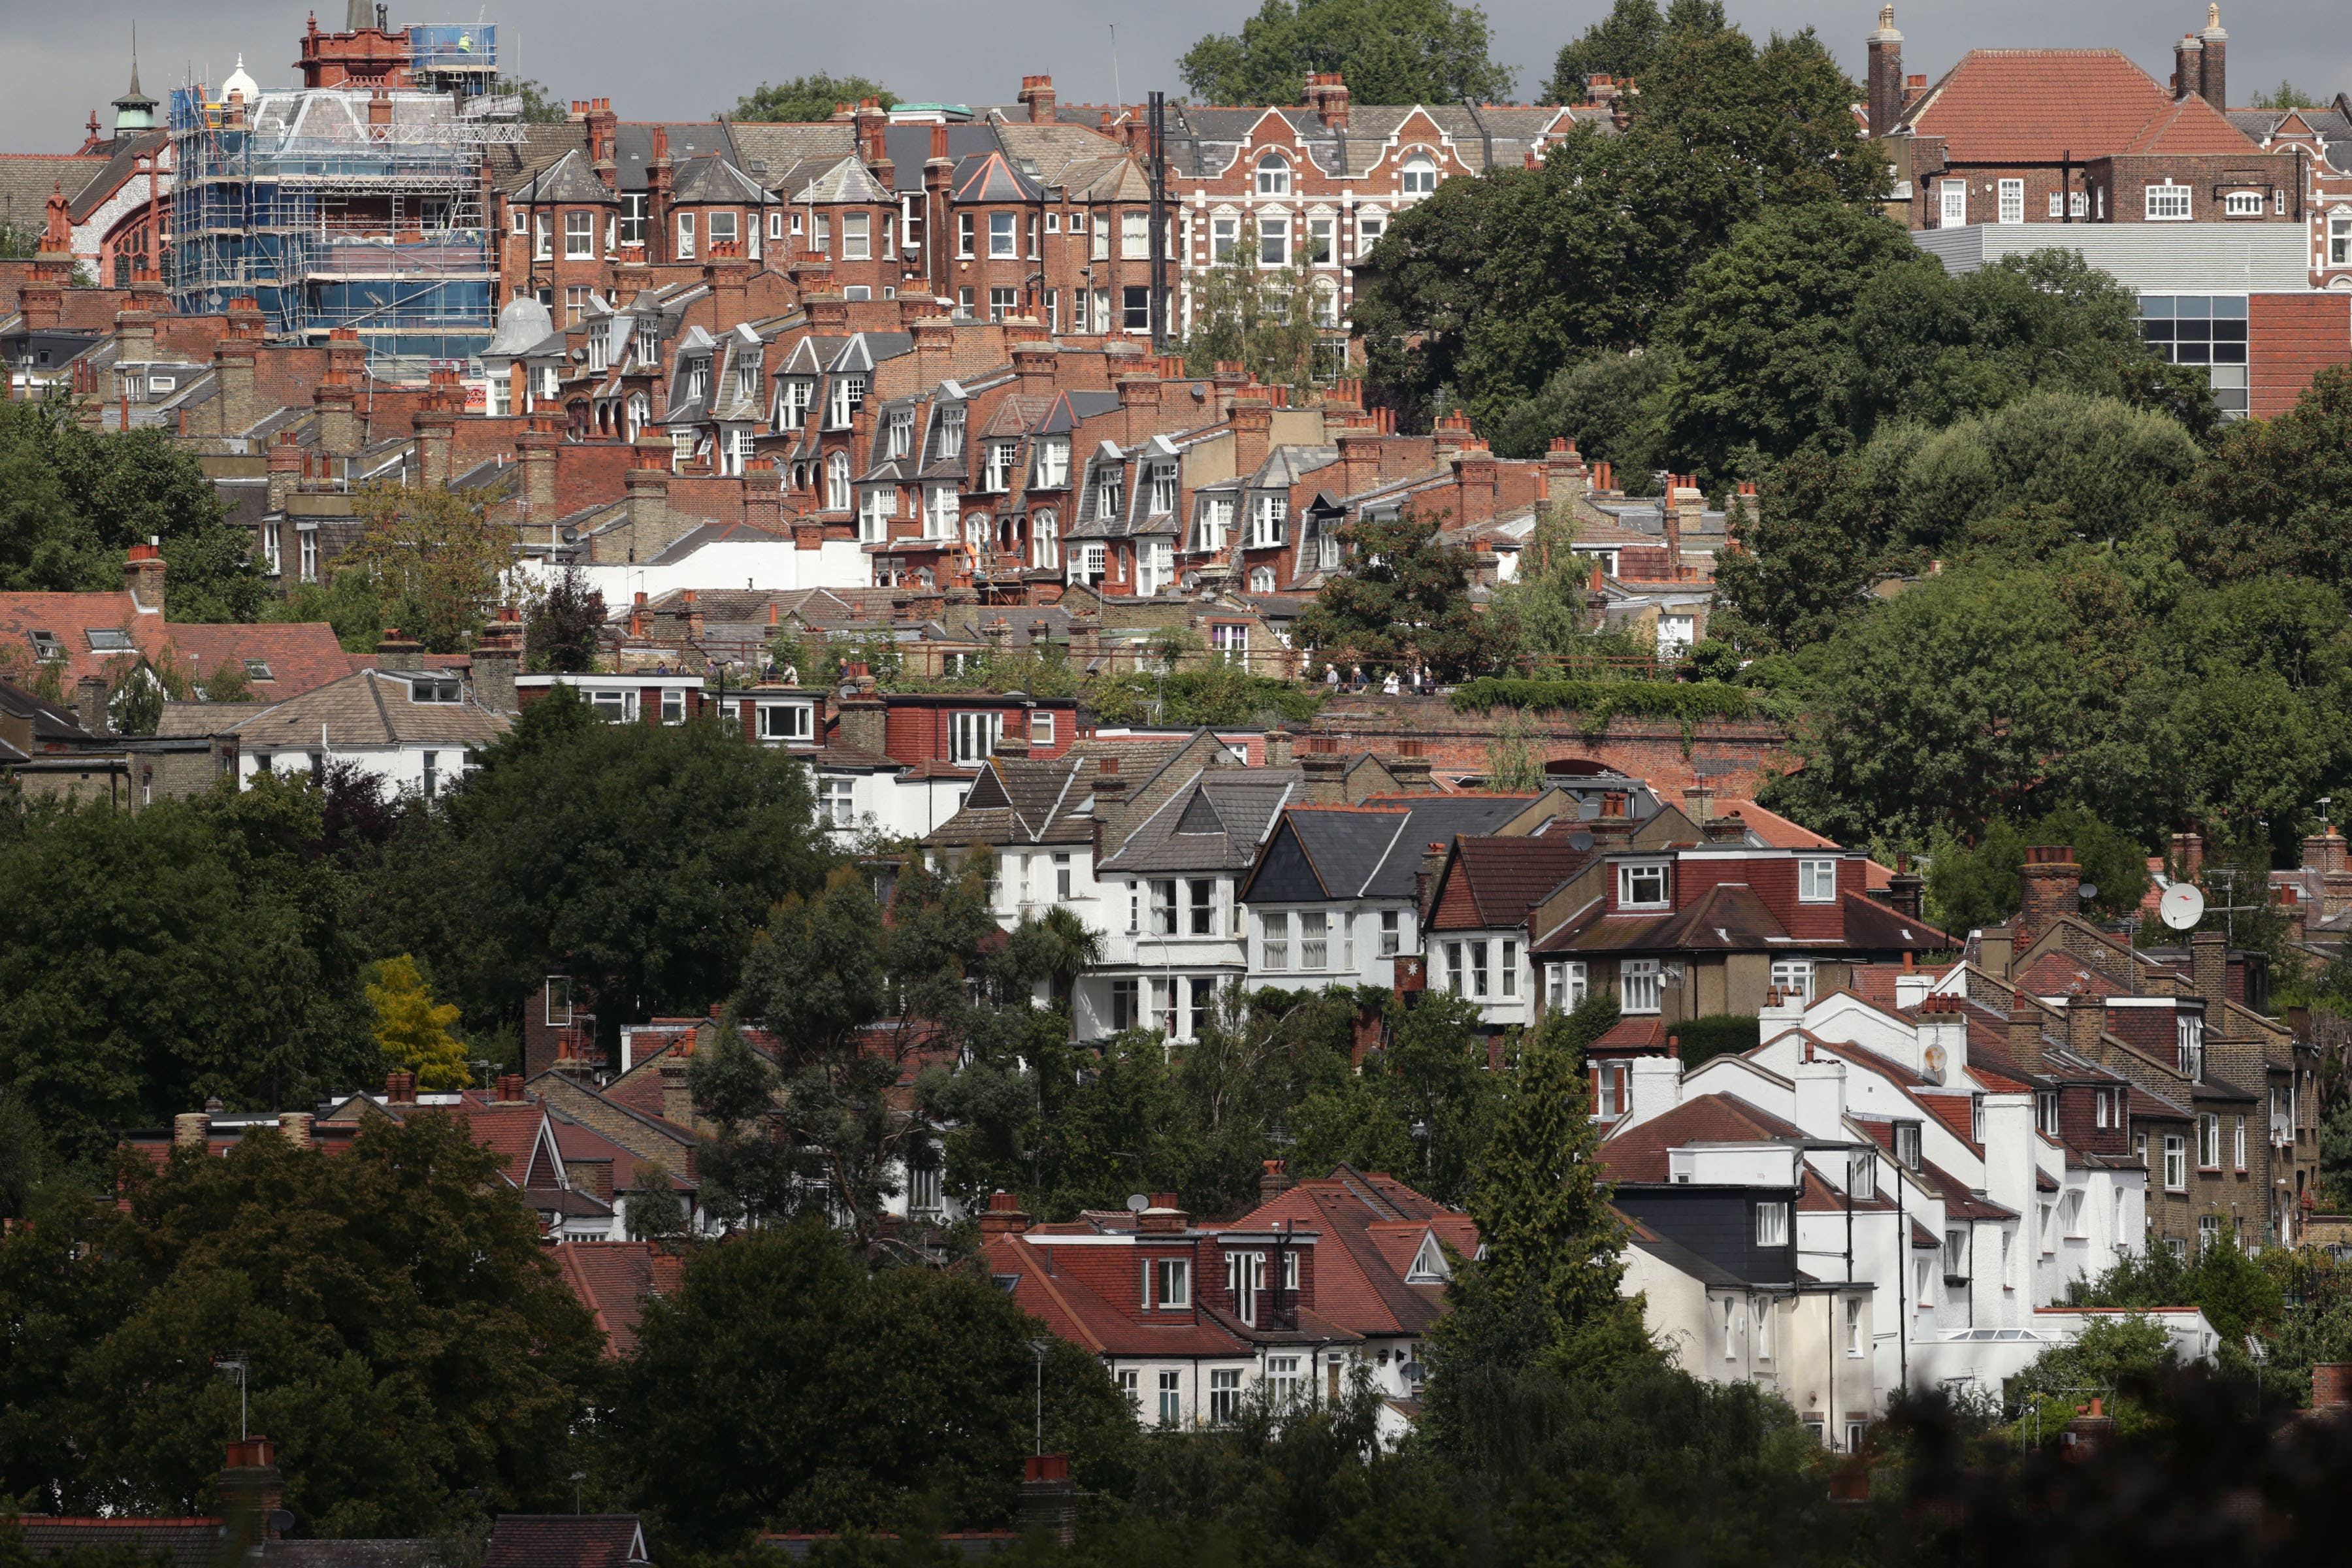 House prices are likely to rise more slowly than household incomes over the next couple of years, Zoopla predicts (Yui Mok/PA)